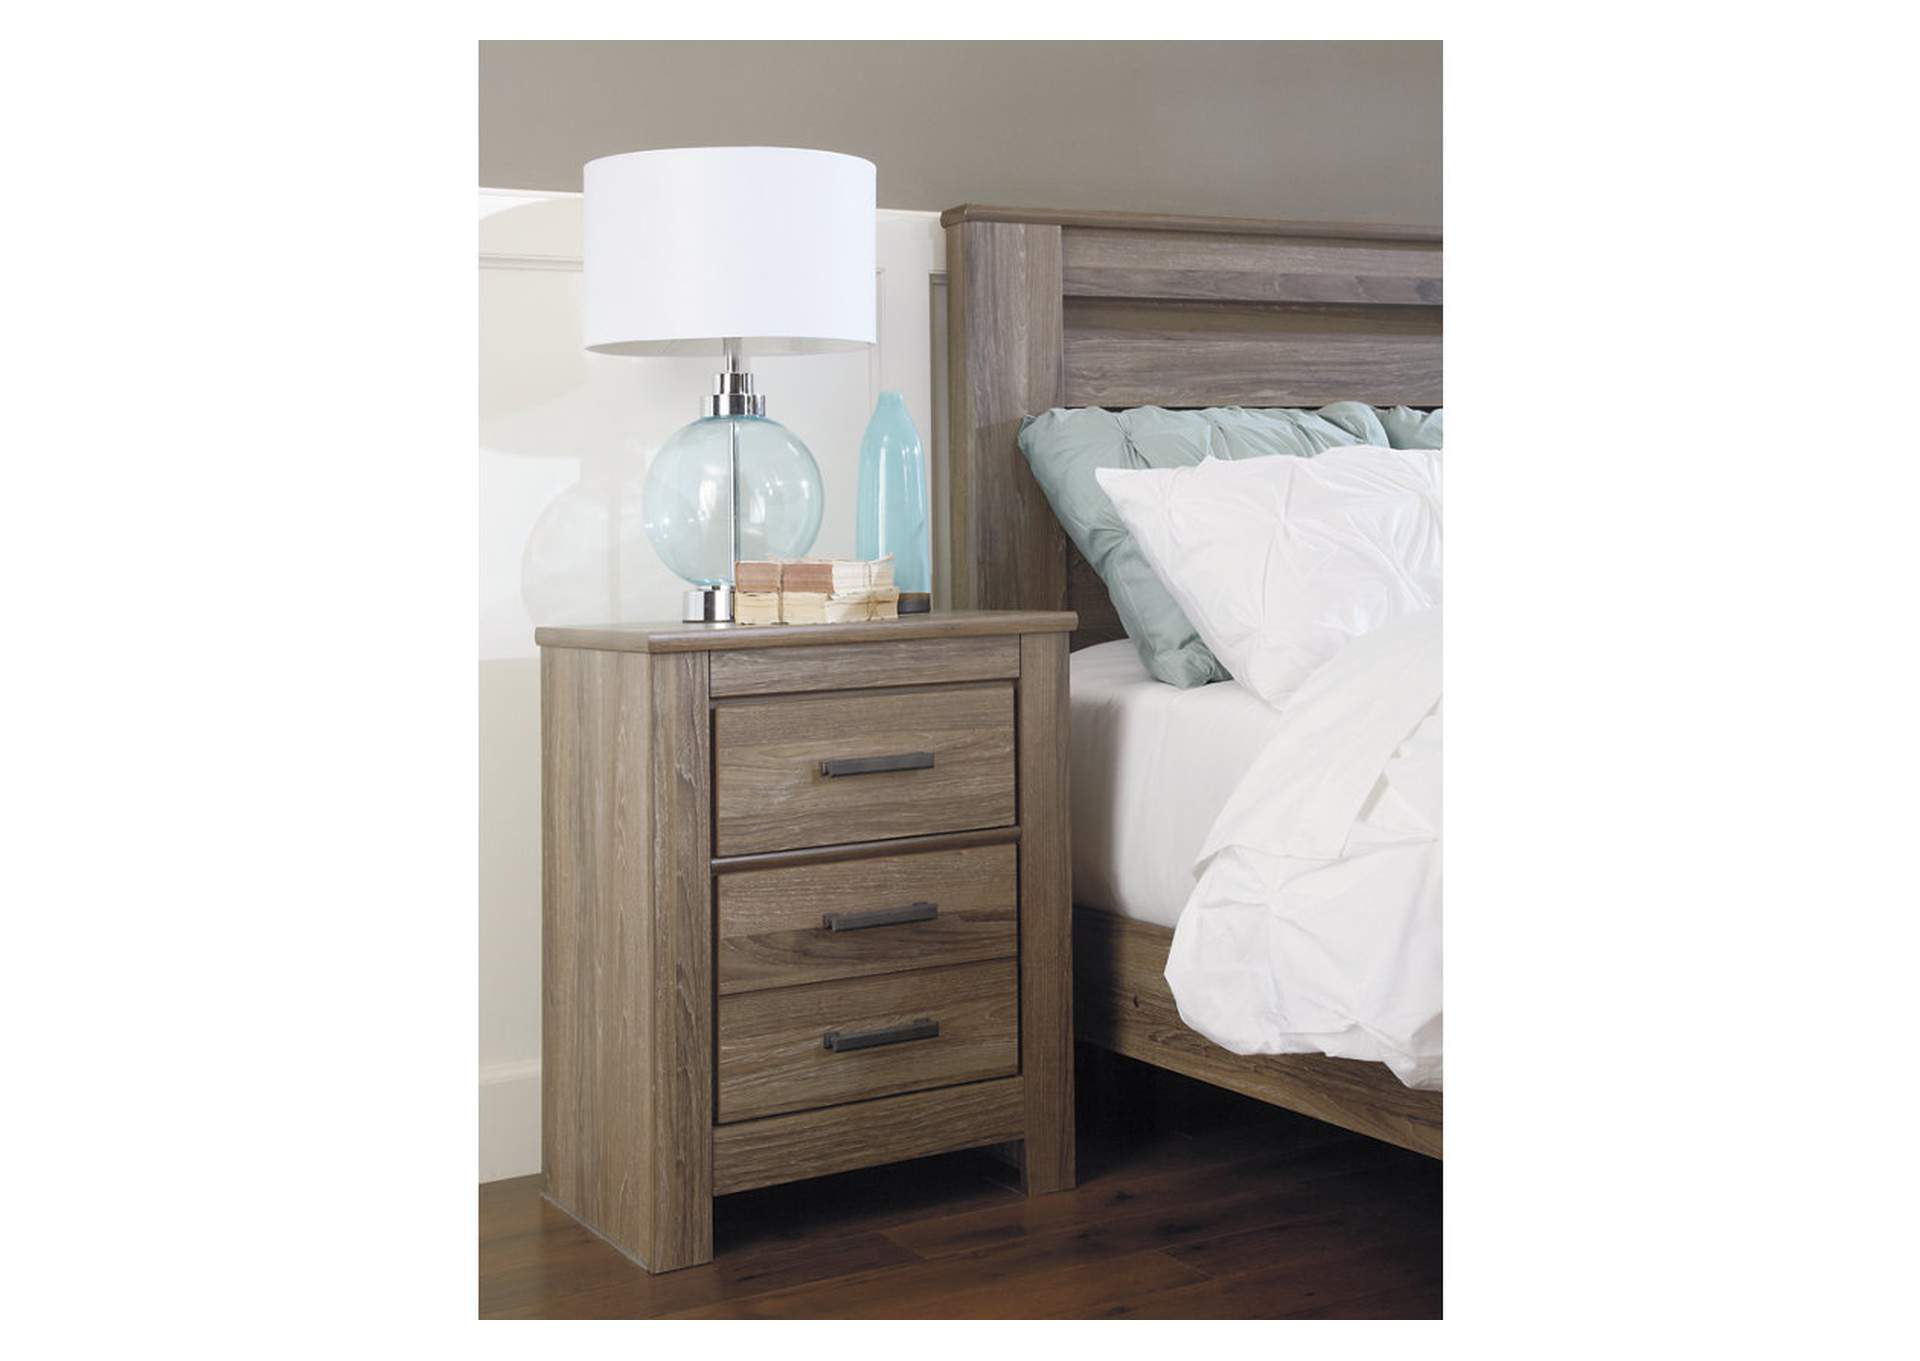 Zelen King/California King Panel Headboard Bed with Mirrored Dresser, Chest and Nightstand,Signature Design By Ashley